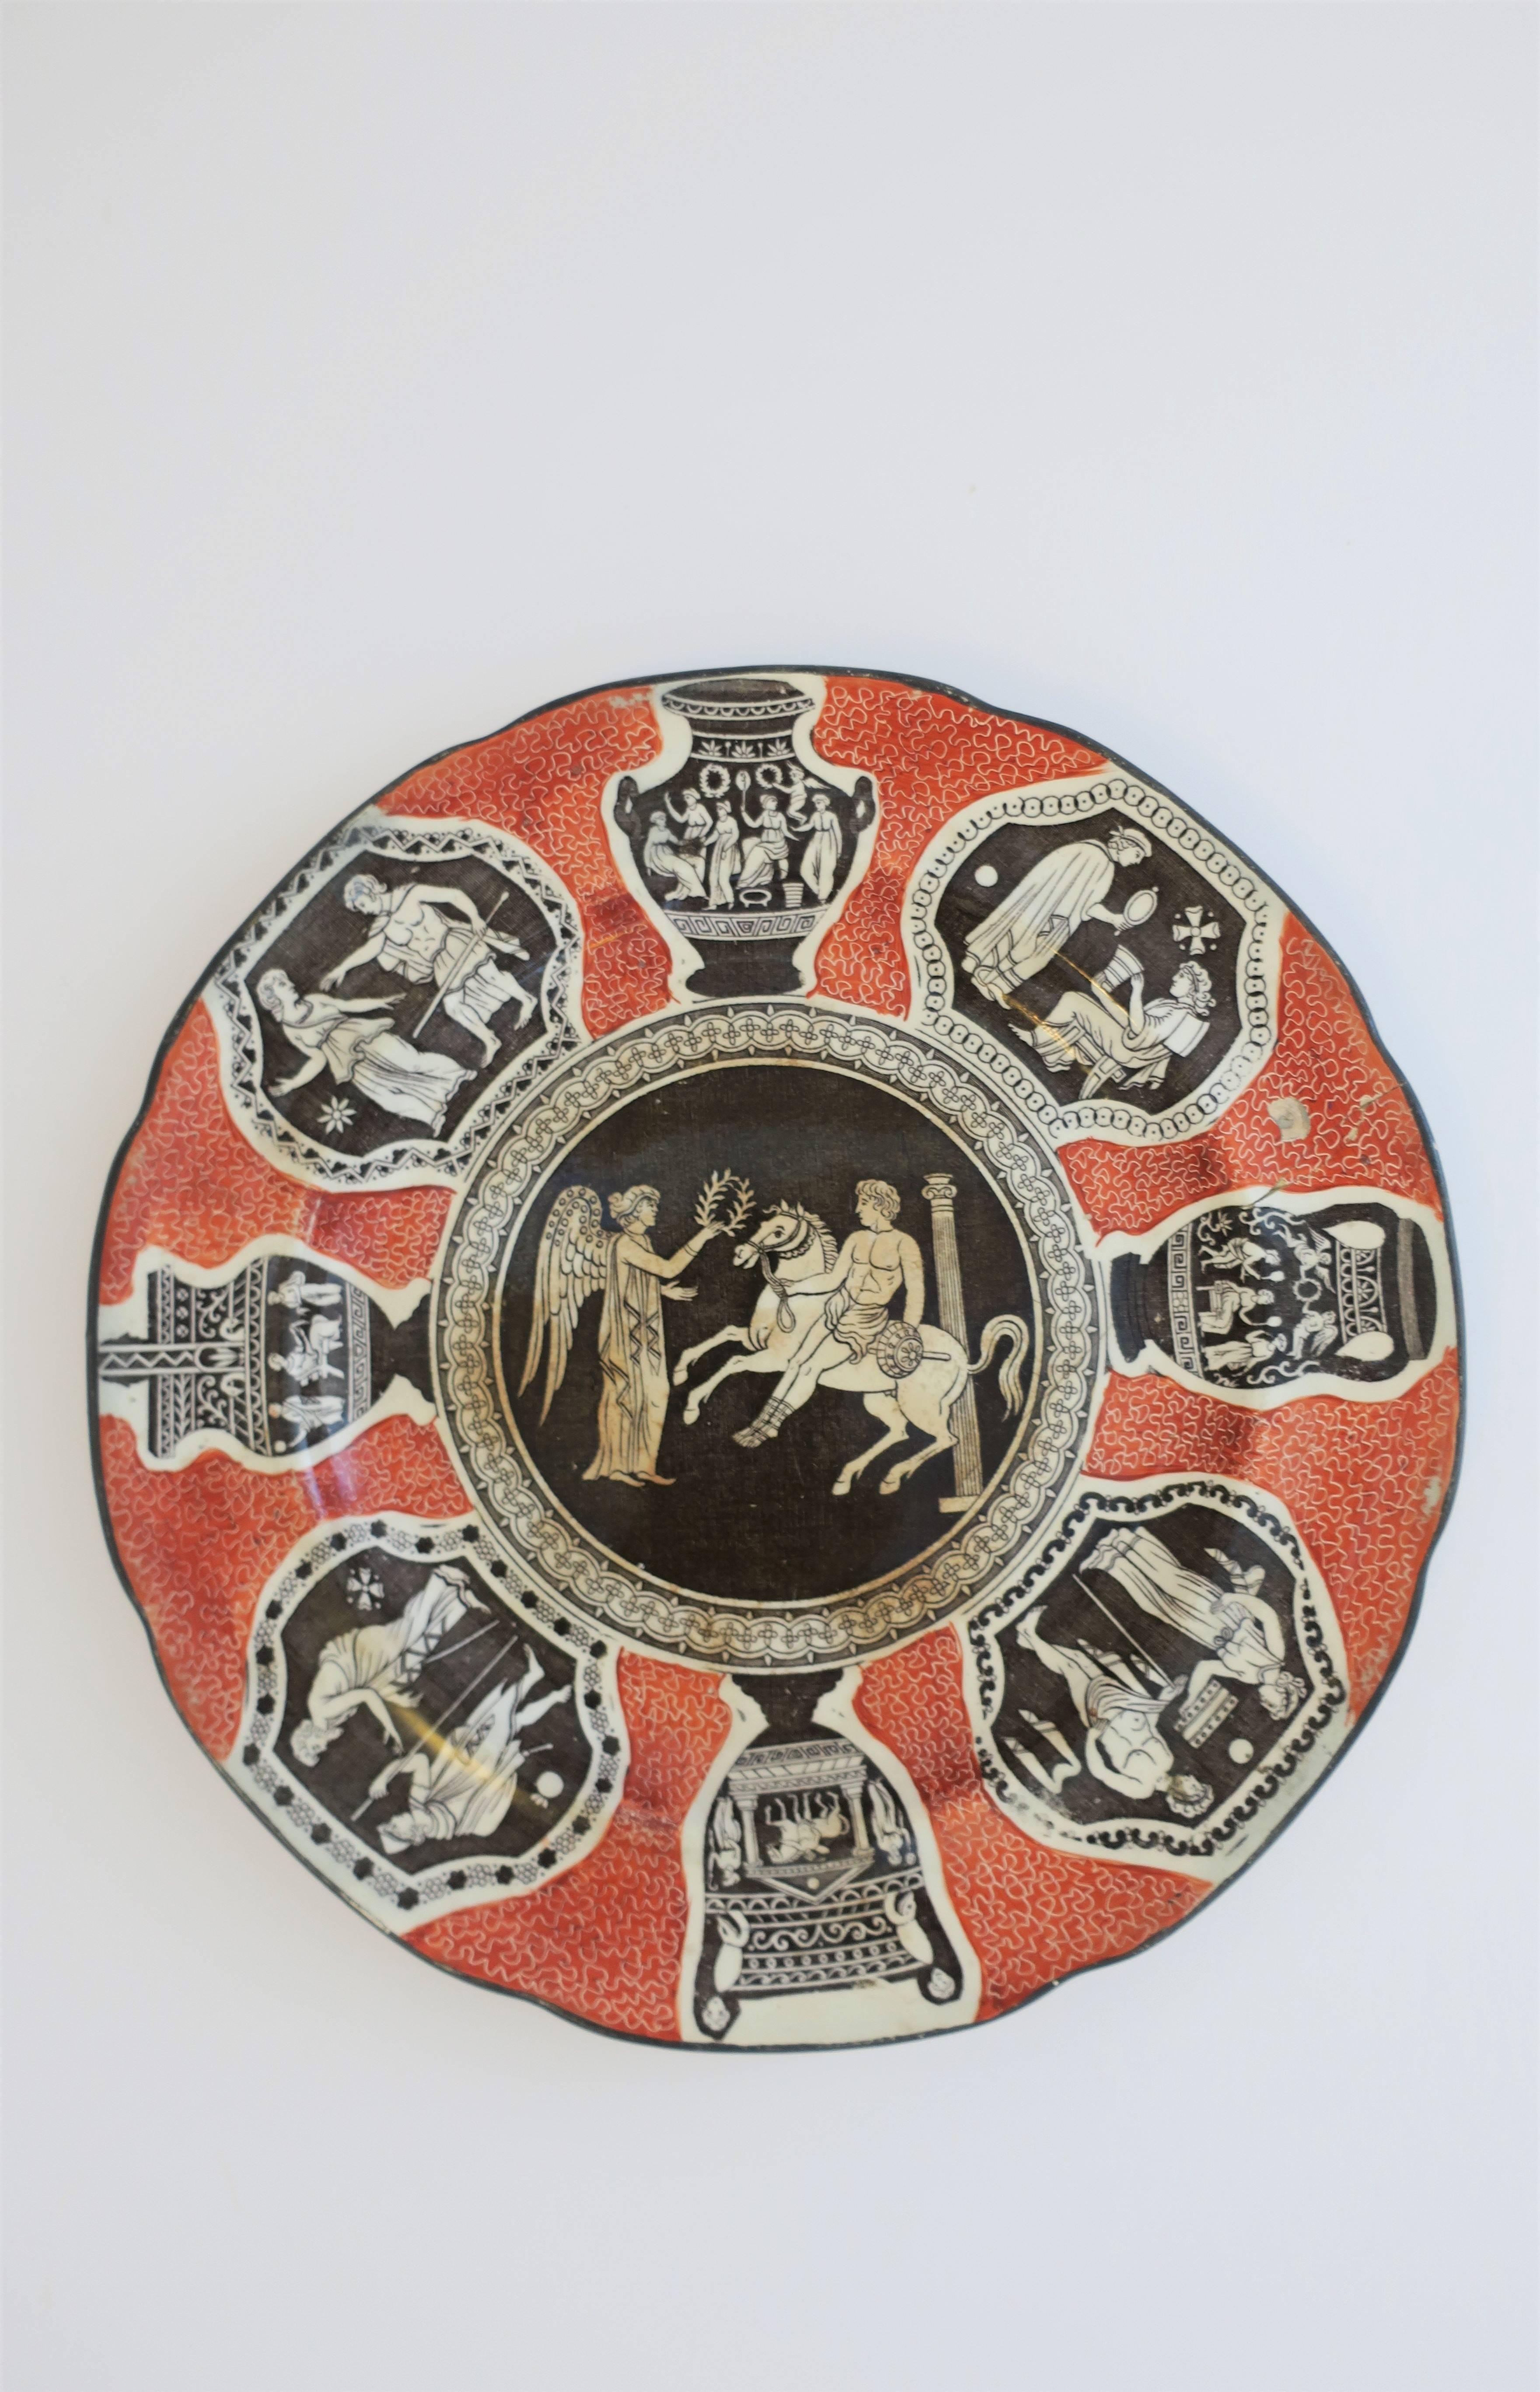 A beautiful antique figural relief wall art plate, circa 18th - 19th Century. Plate depicts urn, column, horse, and classic Greek figures. Colors include off-white or bisque ceramic porcelain with dark brown and orange. Marker's mark on back: